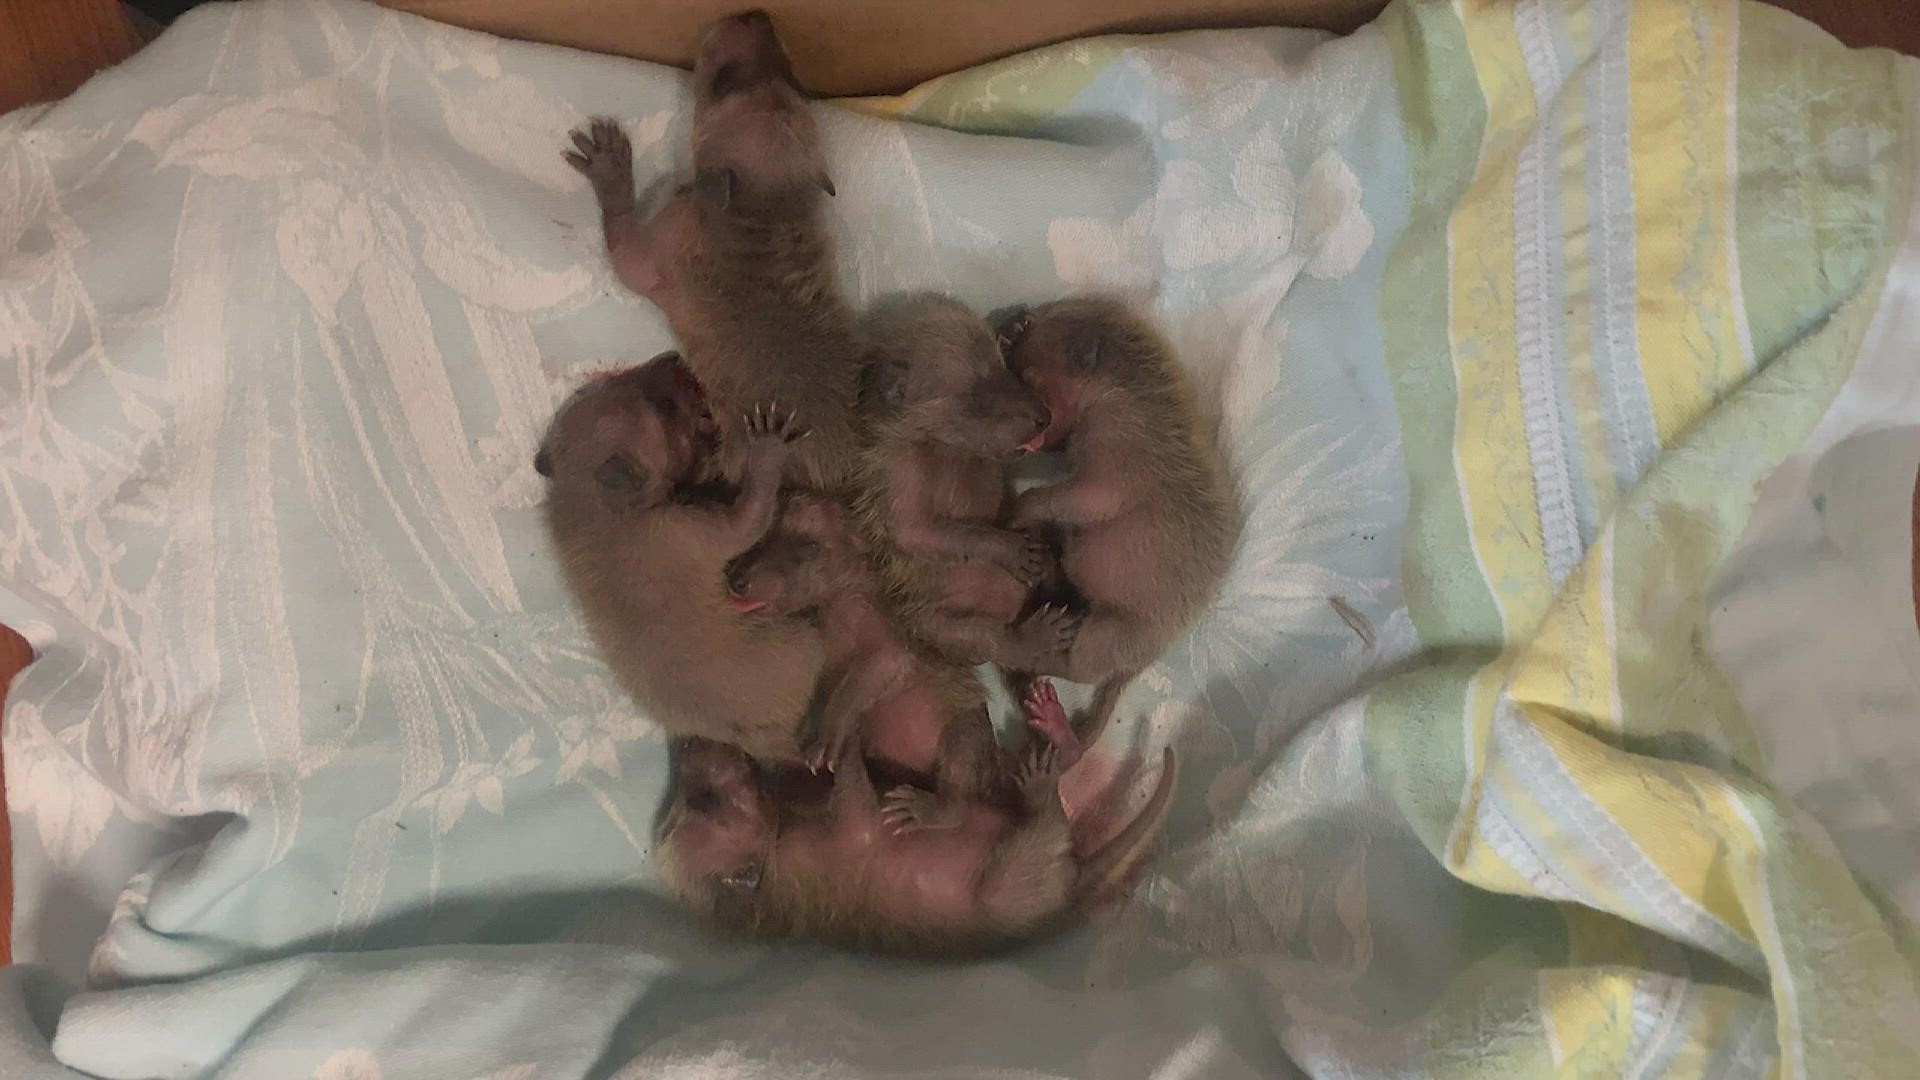 AdventHealth Central Texas healthcare workers save baby raccoons in storm drain